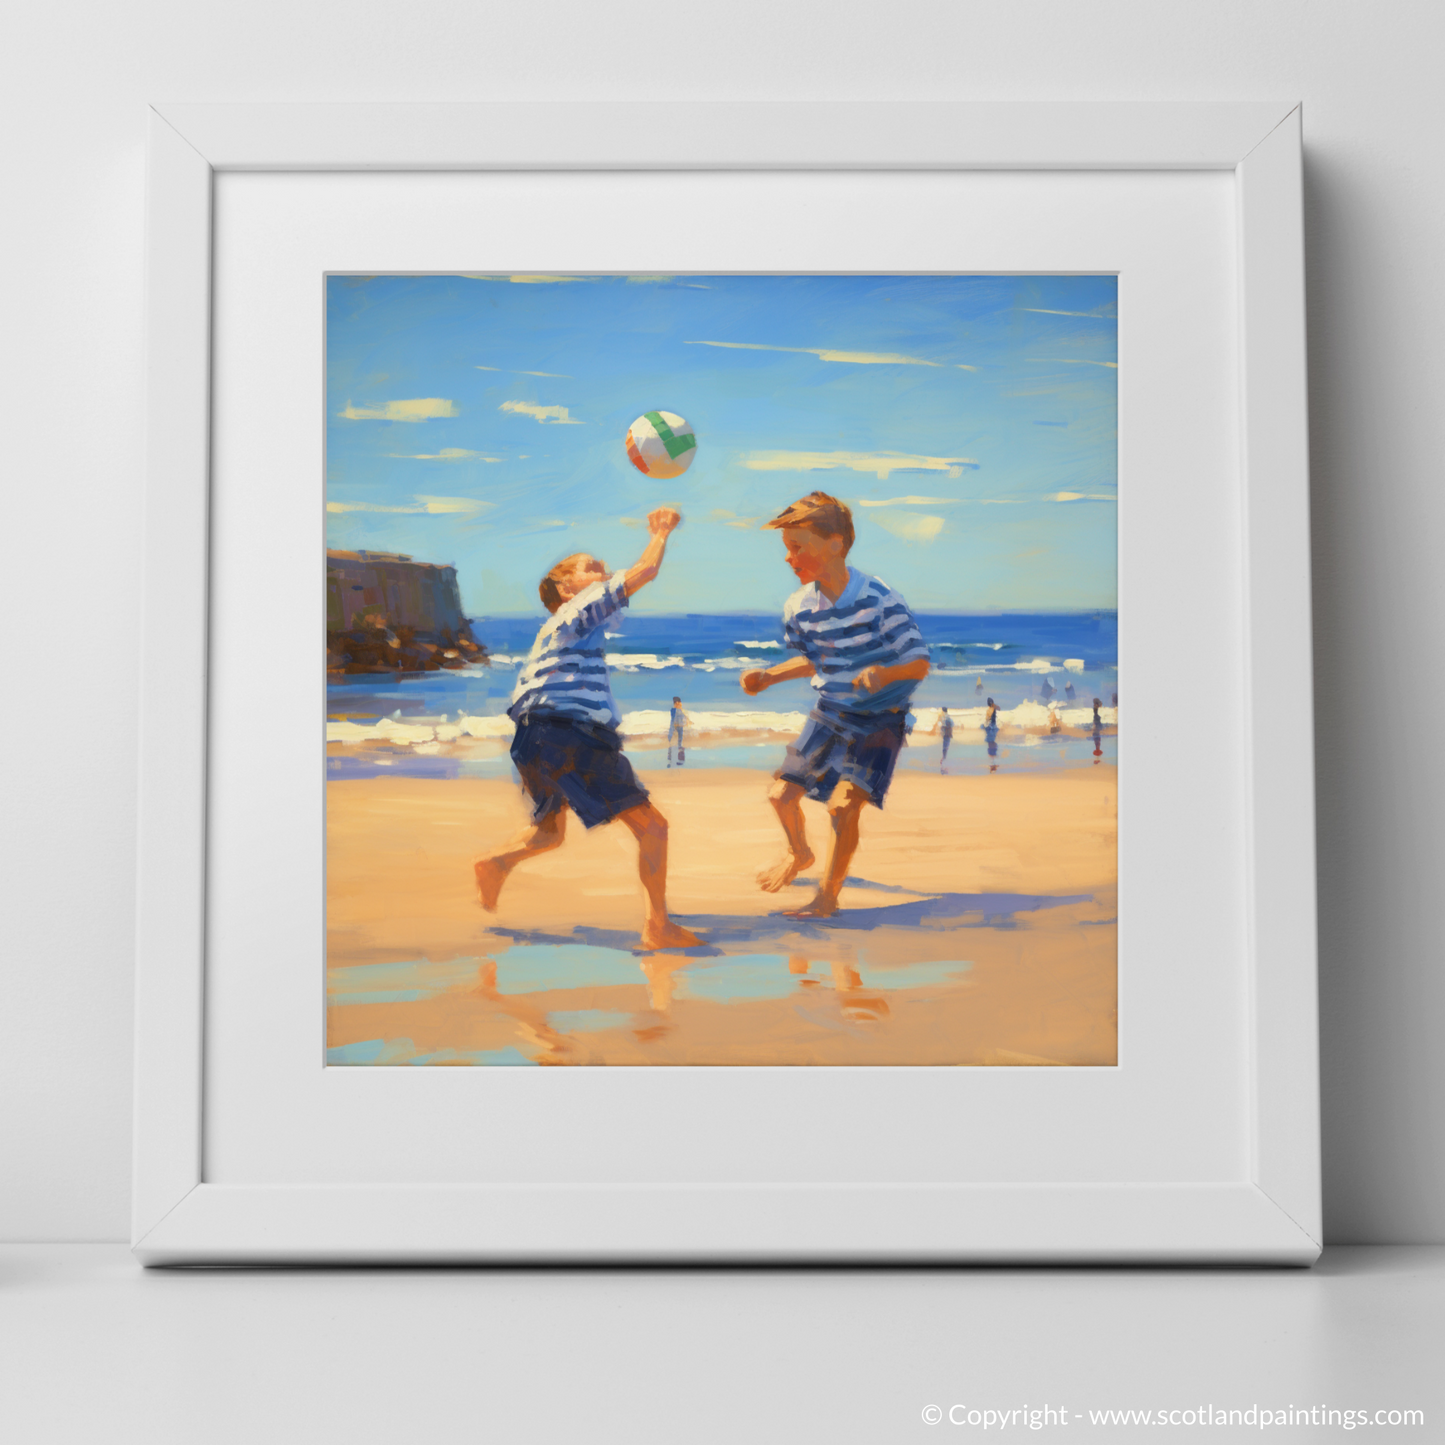 Art Print of Two boys playing beach volleyball at Burghead Beach with a white frame